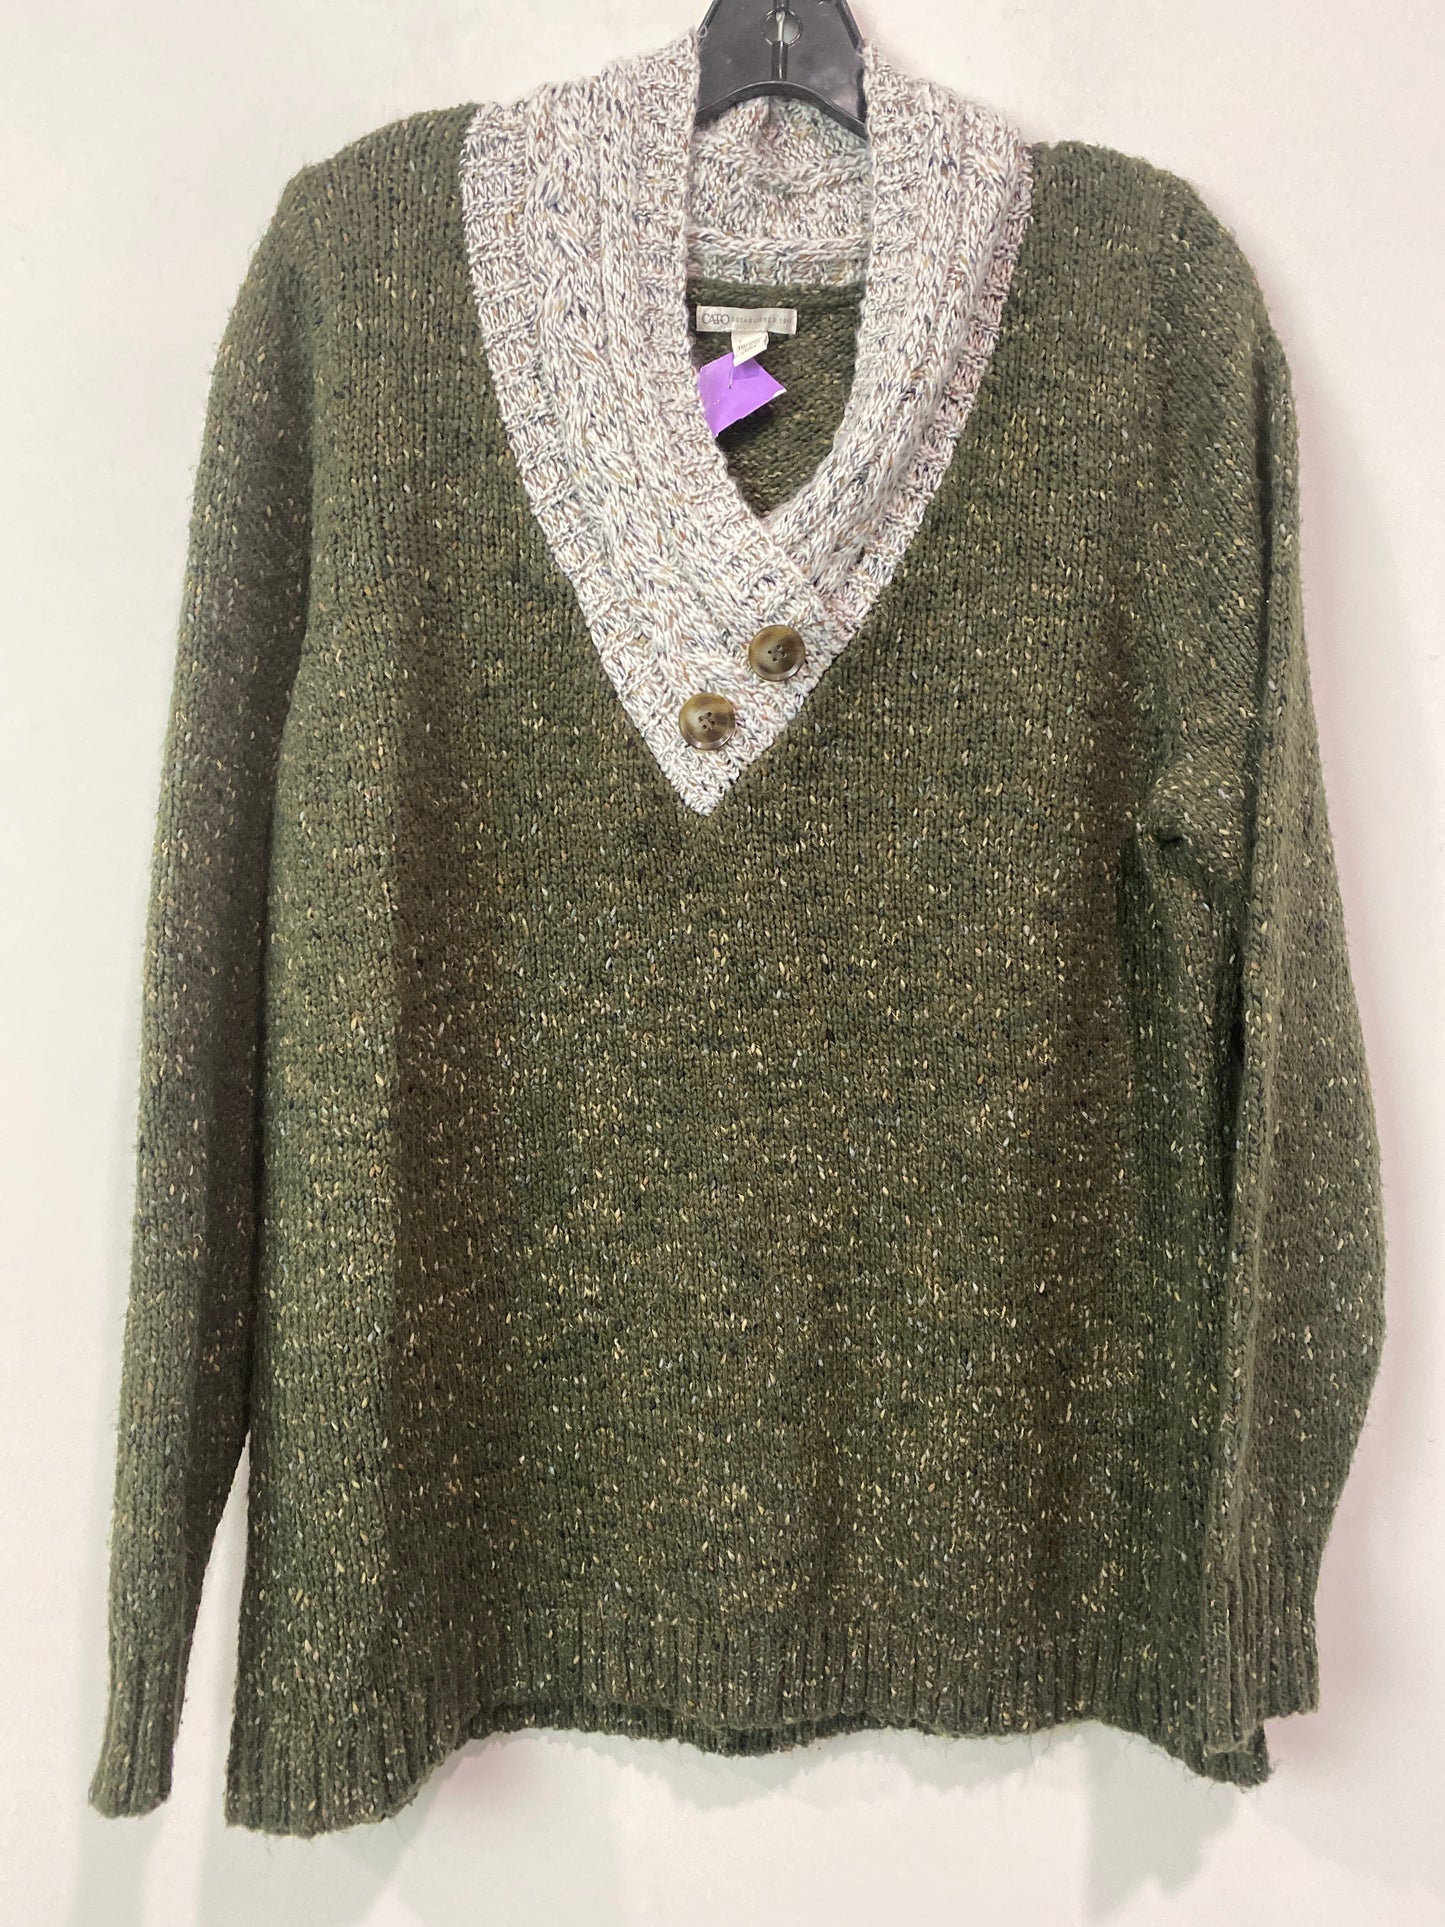 Green Sweater Cato, Size 1x